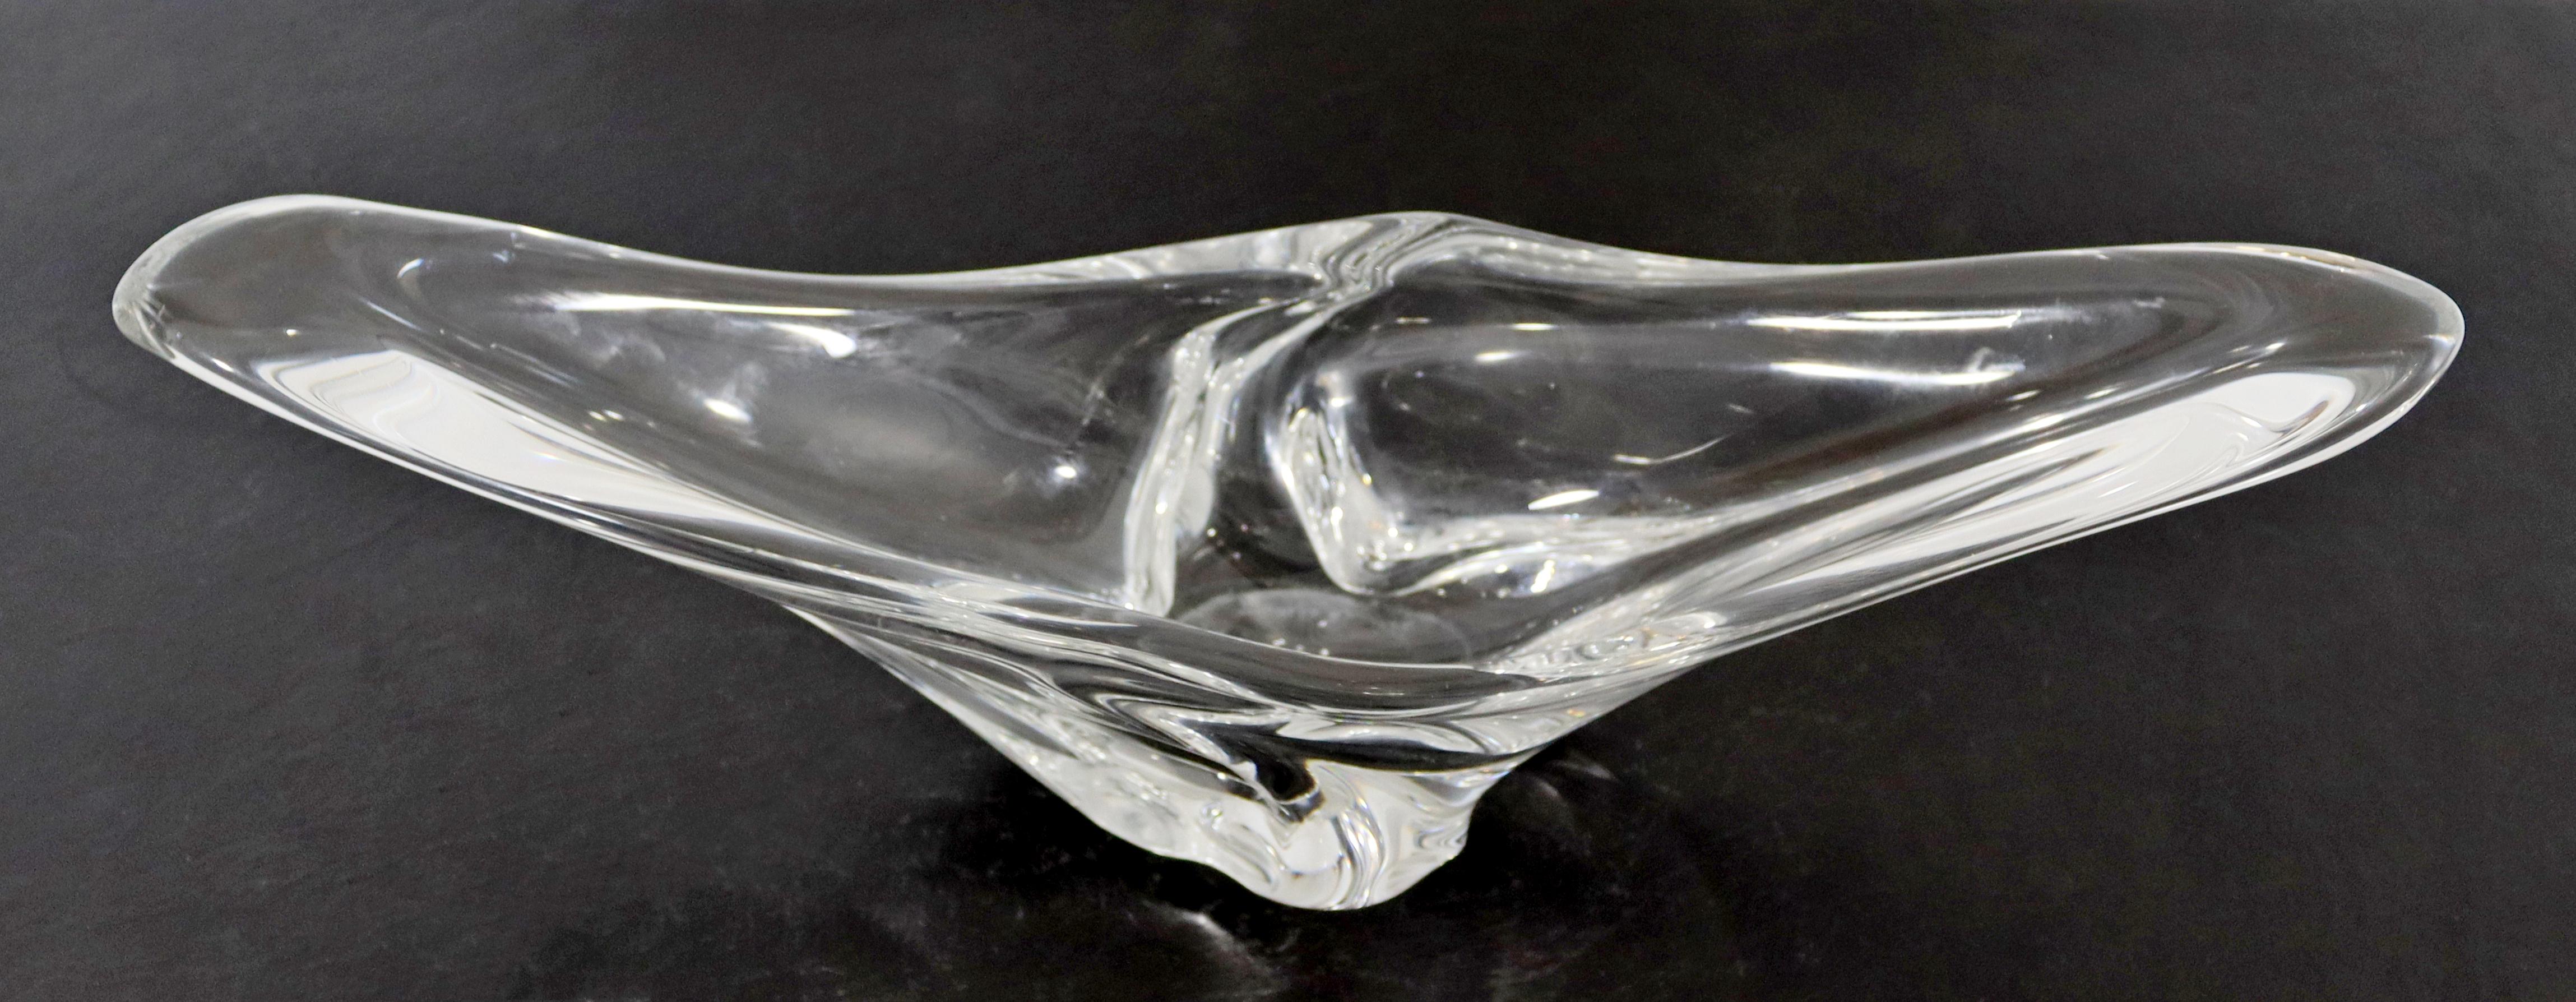 For your consideration is a fantastic, curvilinear, crystal glass bowl, signed Daum France. In excellent condition. The dimensions are 16.5